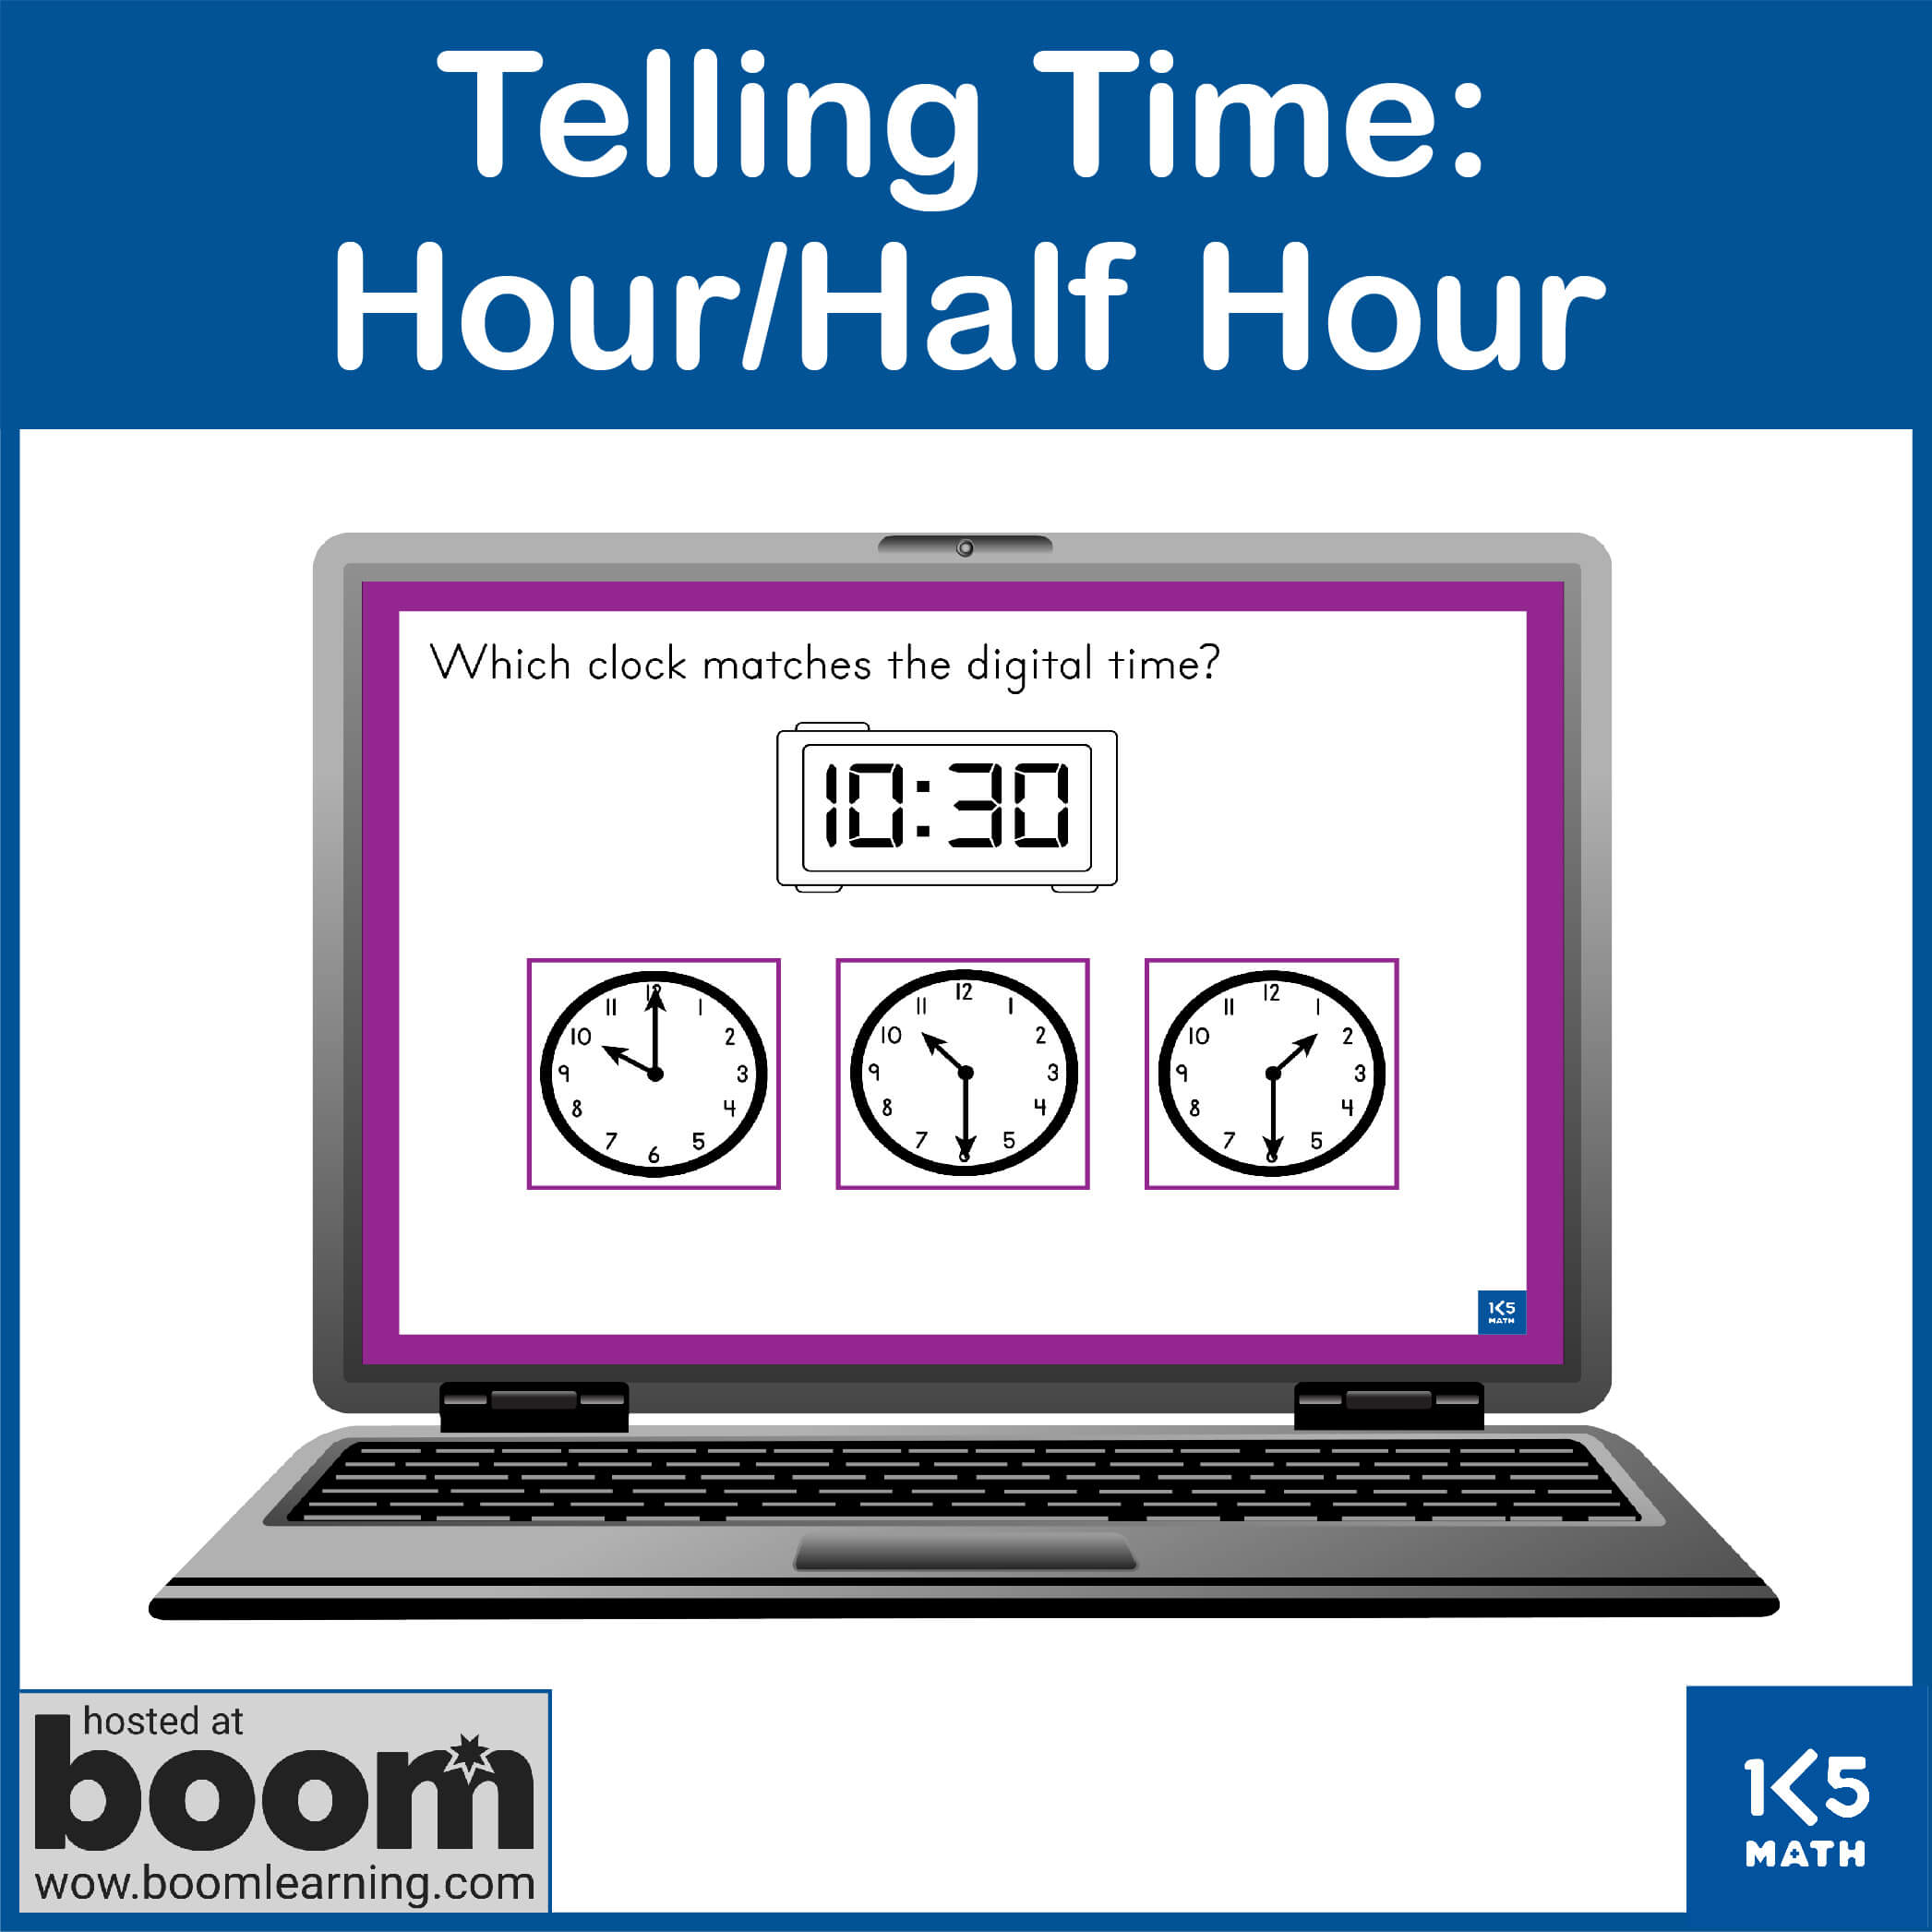 Boom Cards: Telling Time to the Hour and Half Hour